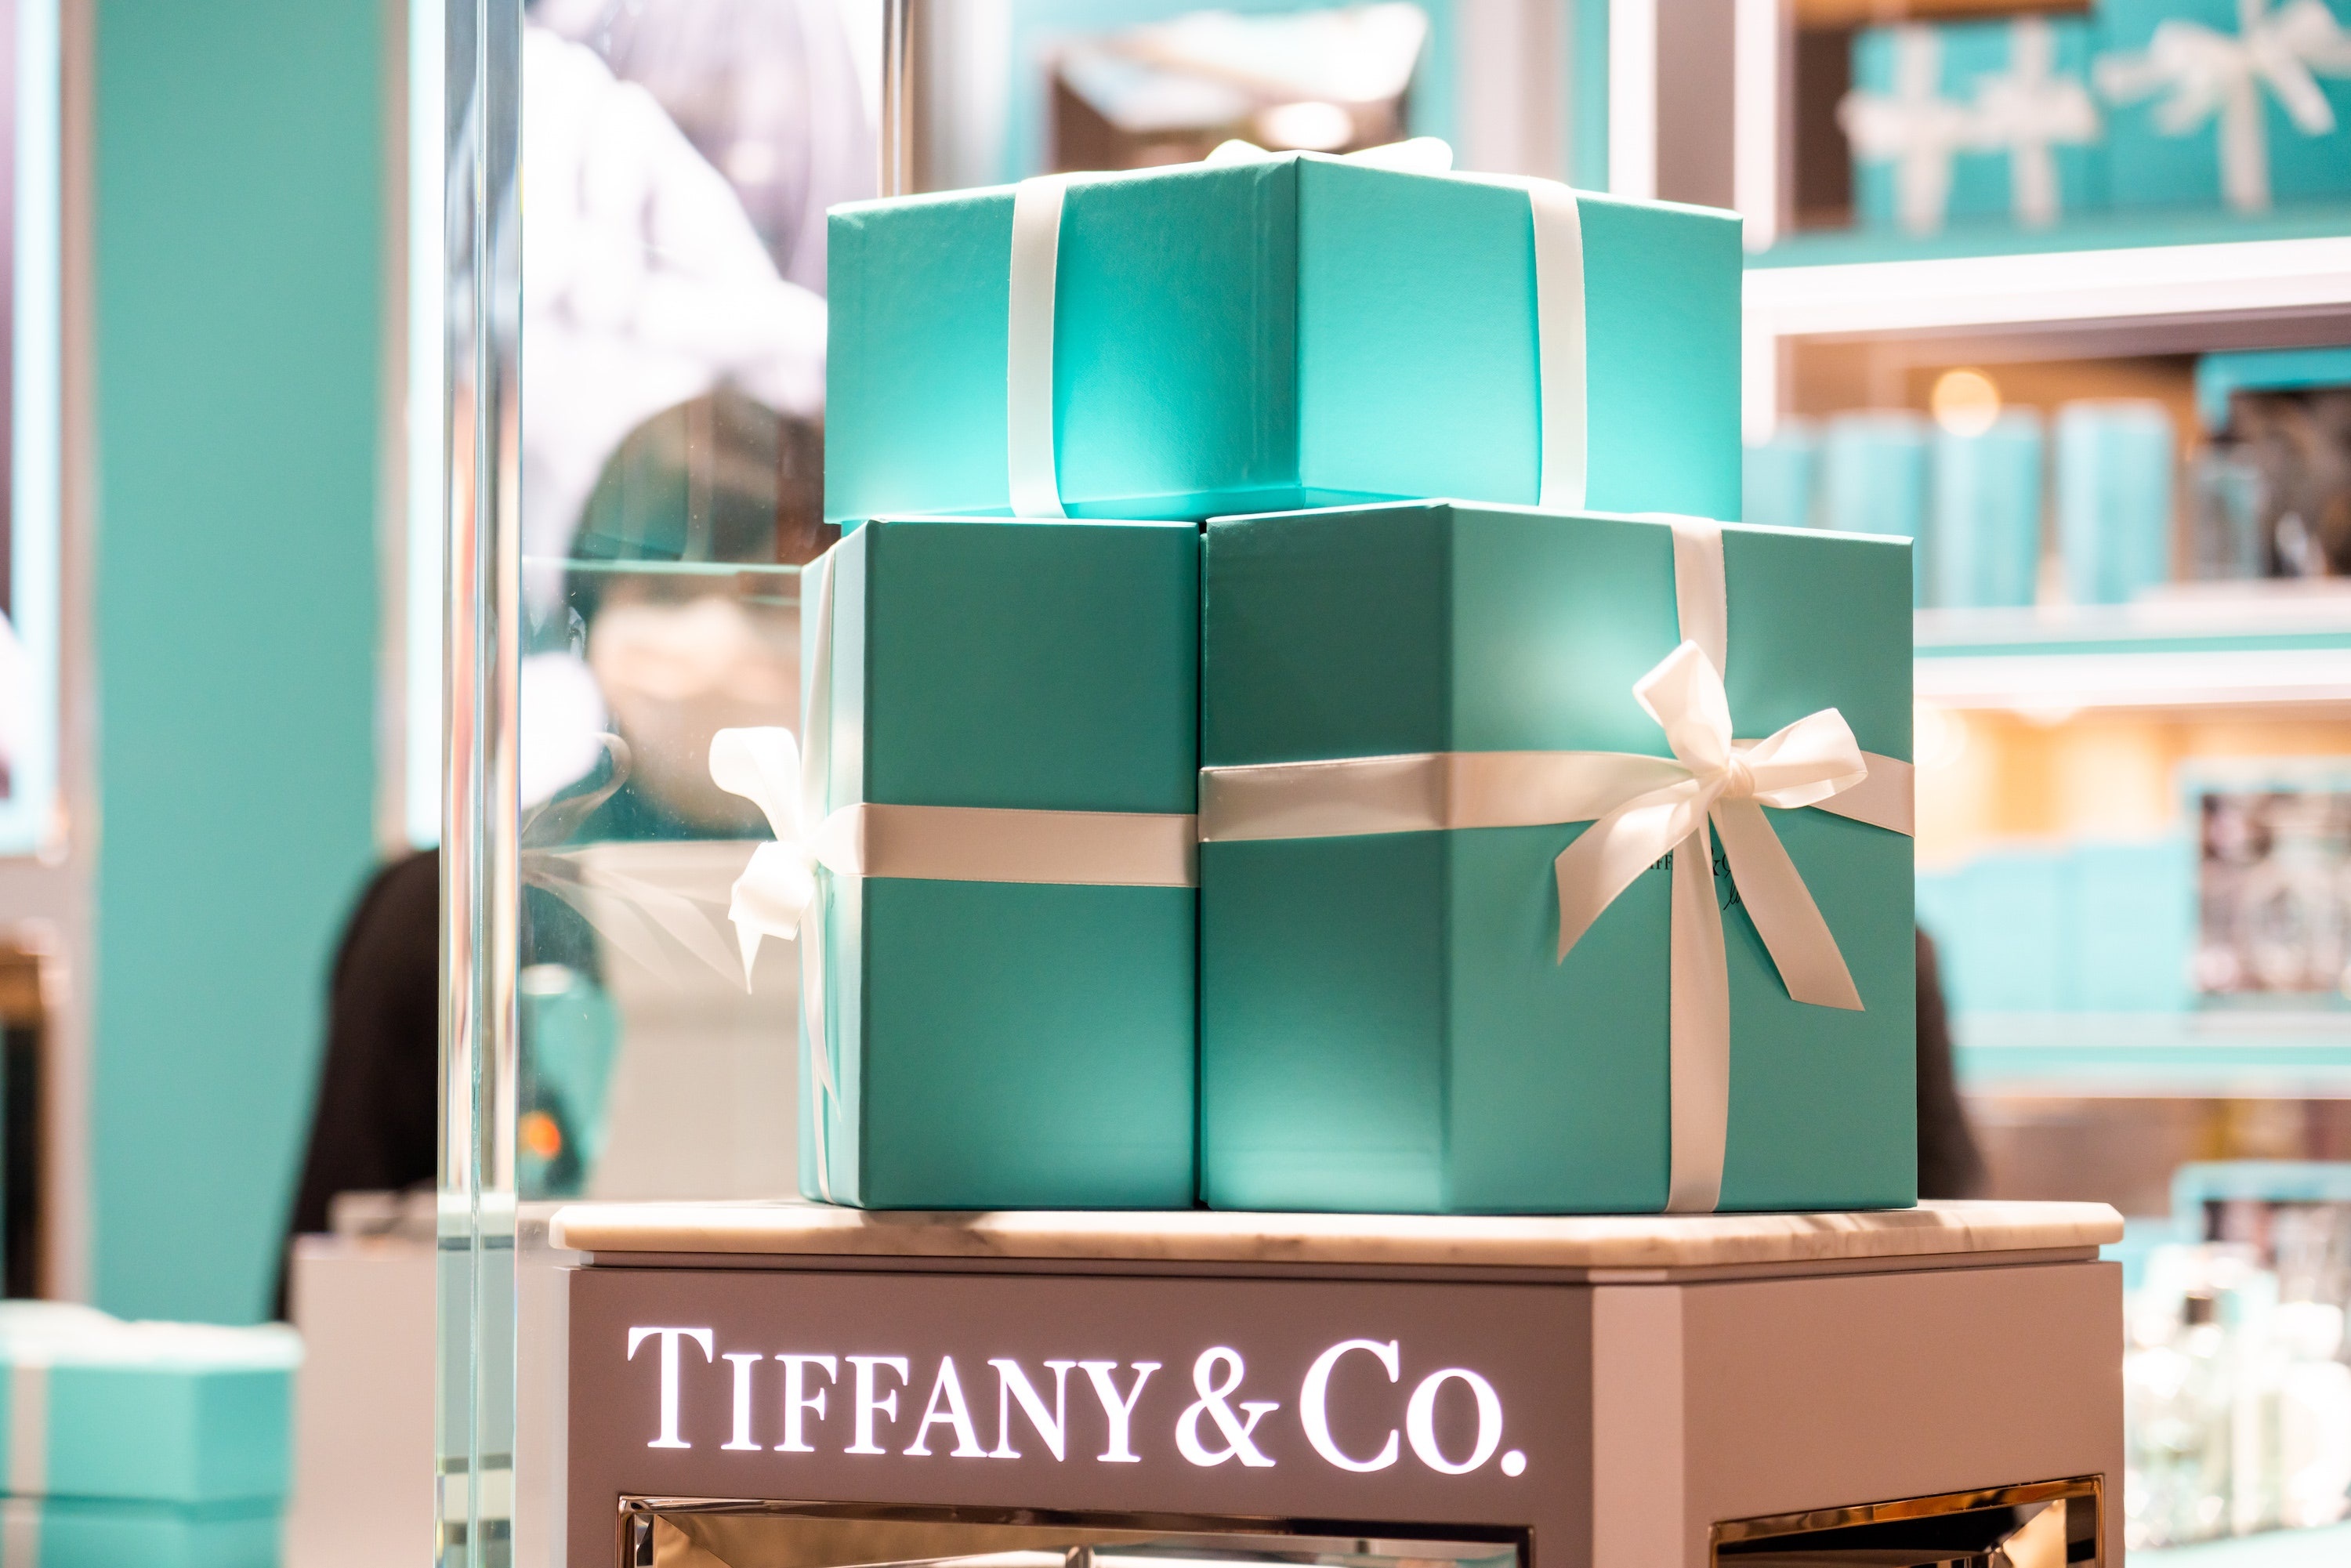 Tiffany & Co: An American luxury jewelry, Headquartered in Fifth Avenue, New York City. 3000x2010 HD Background.